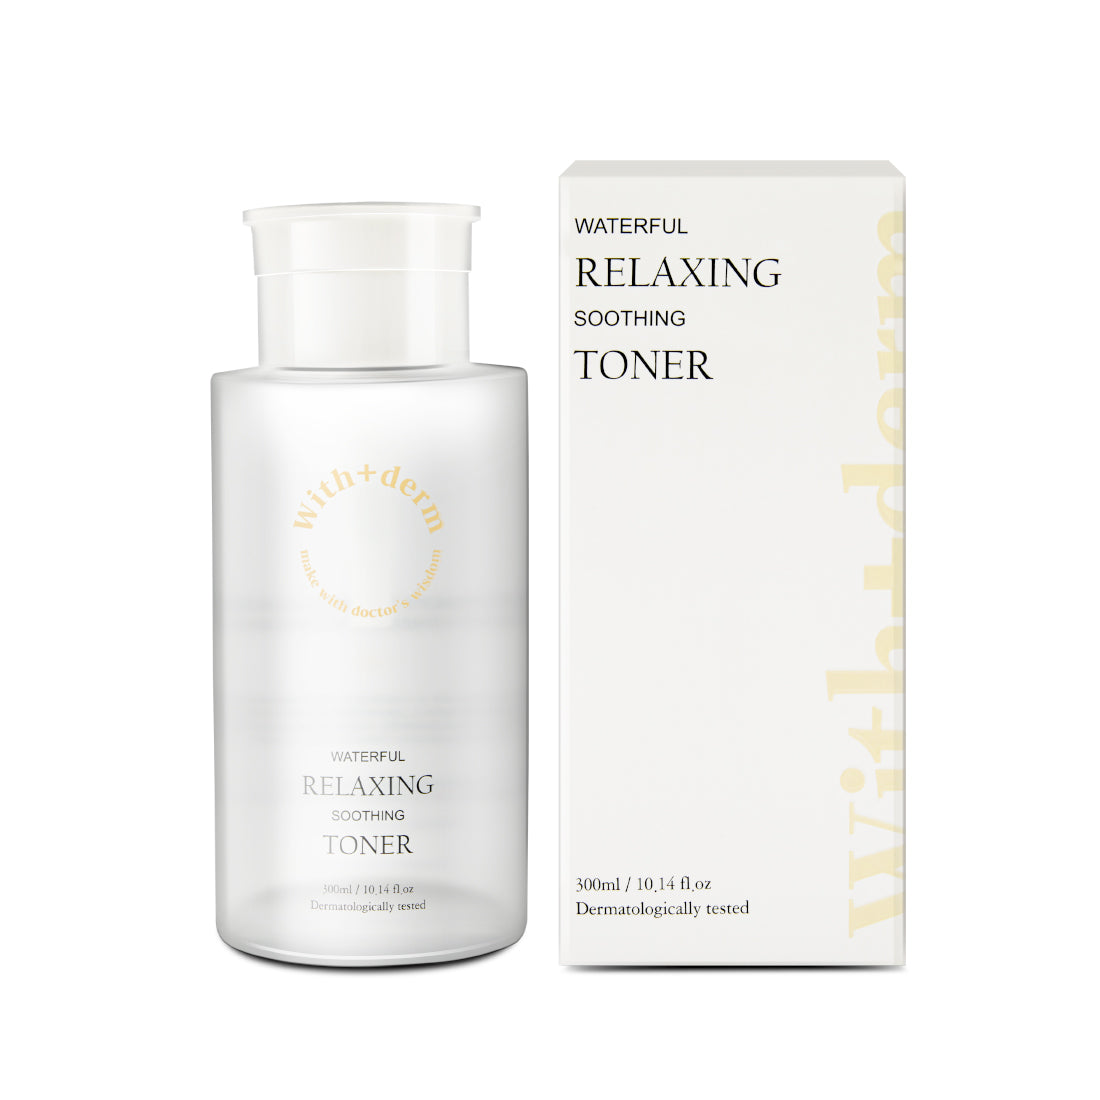 With+Derm Waterful relaxing soothing toner 300ml